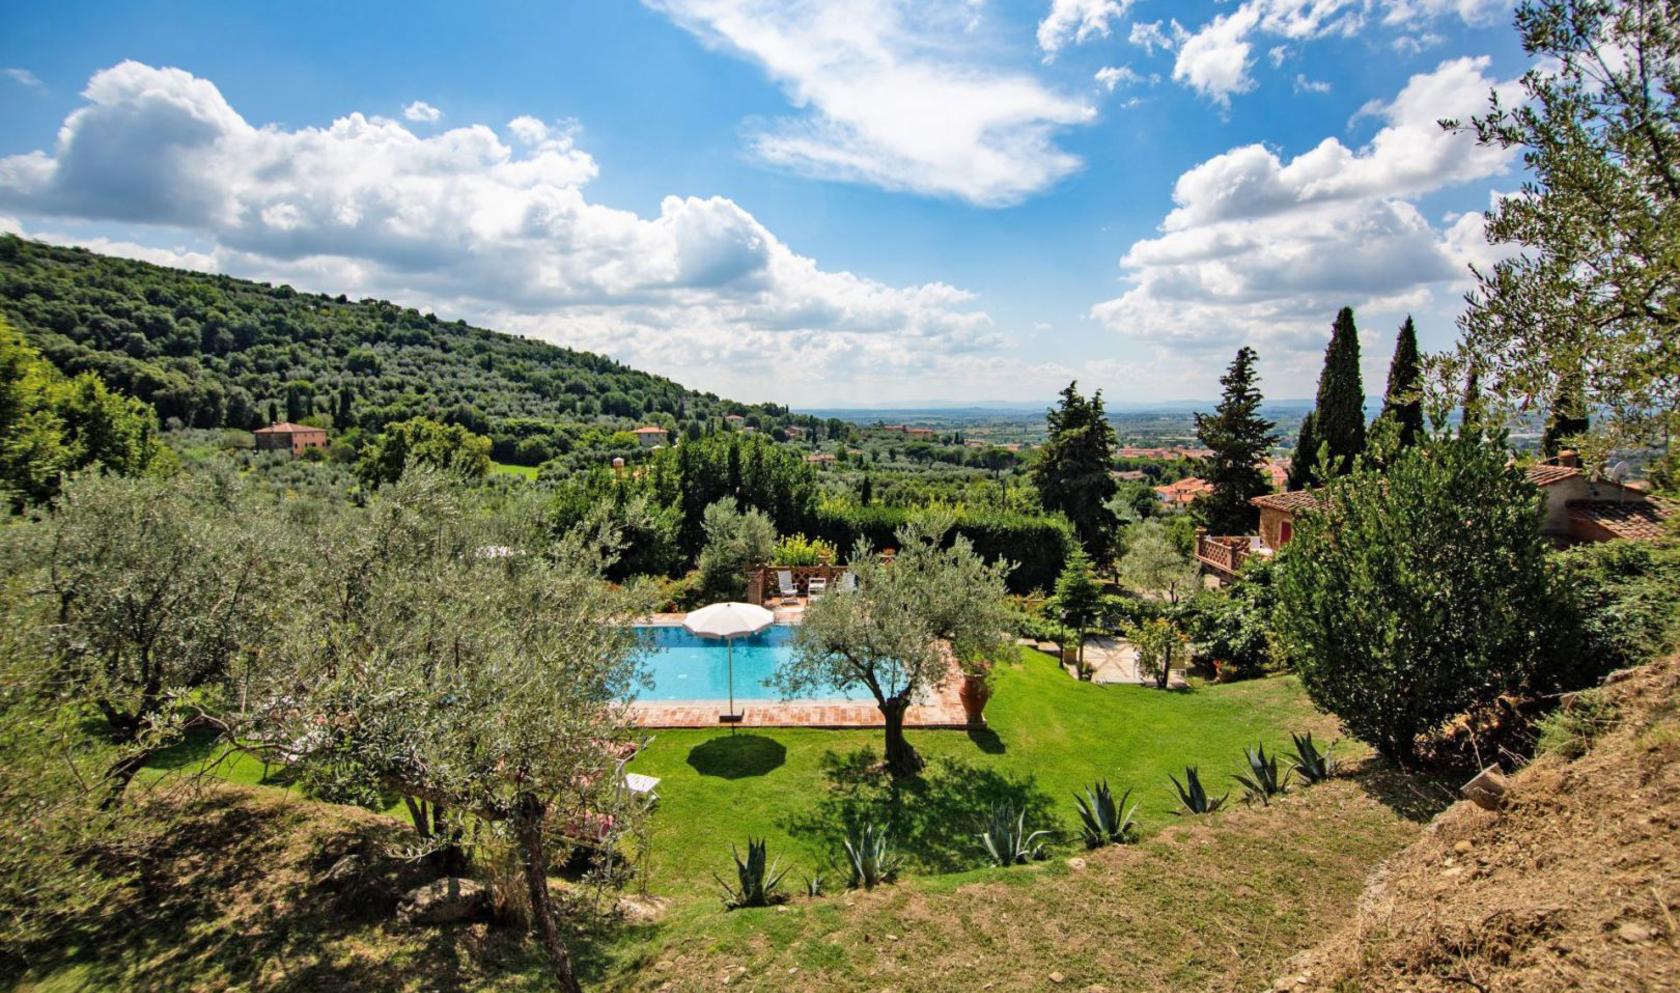 Toscana Immobiliare - Luxury farmhouse for sale in Tuscany